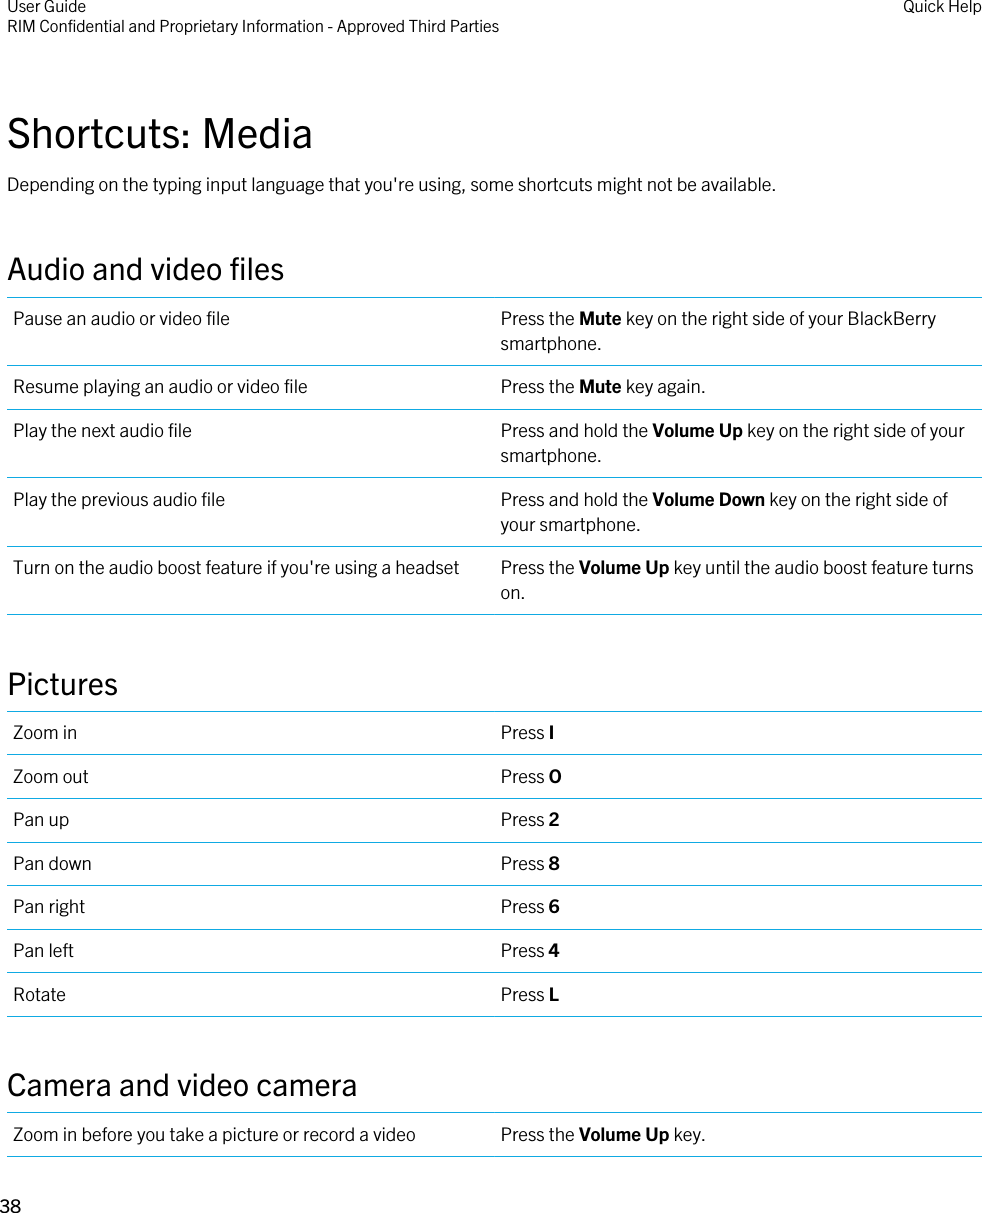 Shortcuts: MediaDepending on the typing input language that you&apos;re using, some shortcuts might not be available.Audio and video filesPause an audio or video file Press the Mute key on the right side of your BlackBerry smartphone.Resume playing an audio or video file Press the Mute key again.Play the next audio file Press and hold the Volume Up key on the right side of your smartphone.Play the previous audio file Press and hold the Volume Down key on the right side of your smartphone.Turn on the audio boost feature if you&apos;re using a headset Press the Volume Up key until the audio boost feature turns on.PicturesZoom in Press IZoom out Press OPan up Press 2Pan down Press 8Pan right Press 6Pan left Press 4Rotate Press LCamera and video cameraZoom in before you take a picture or record a video Press the Volume Up key.User GuideRIM Confidential and Proprietary Information - Approved Third Parties Quick Help38 